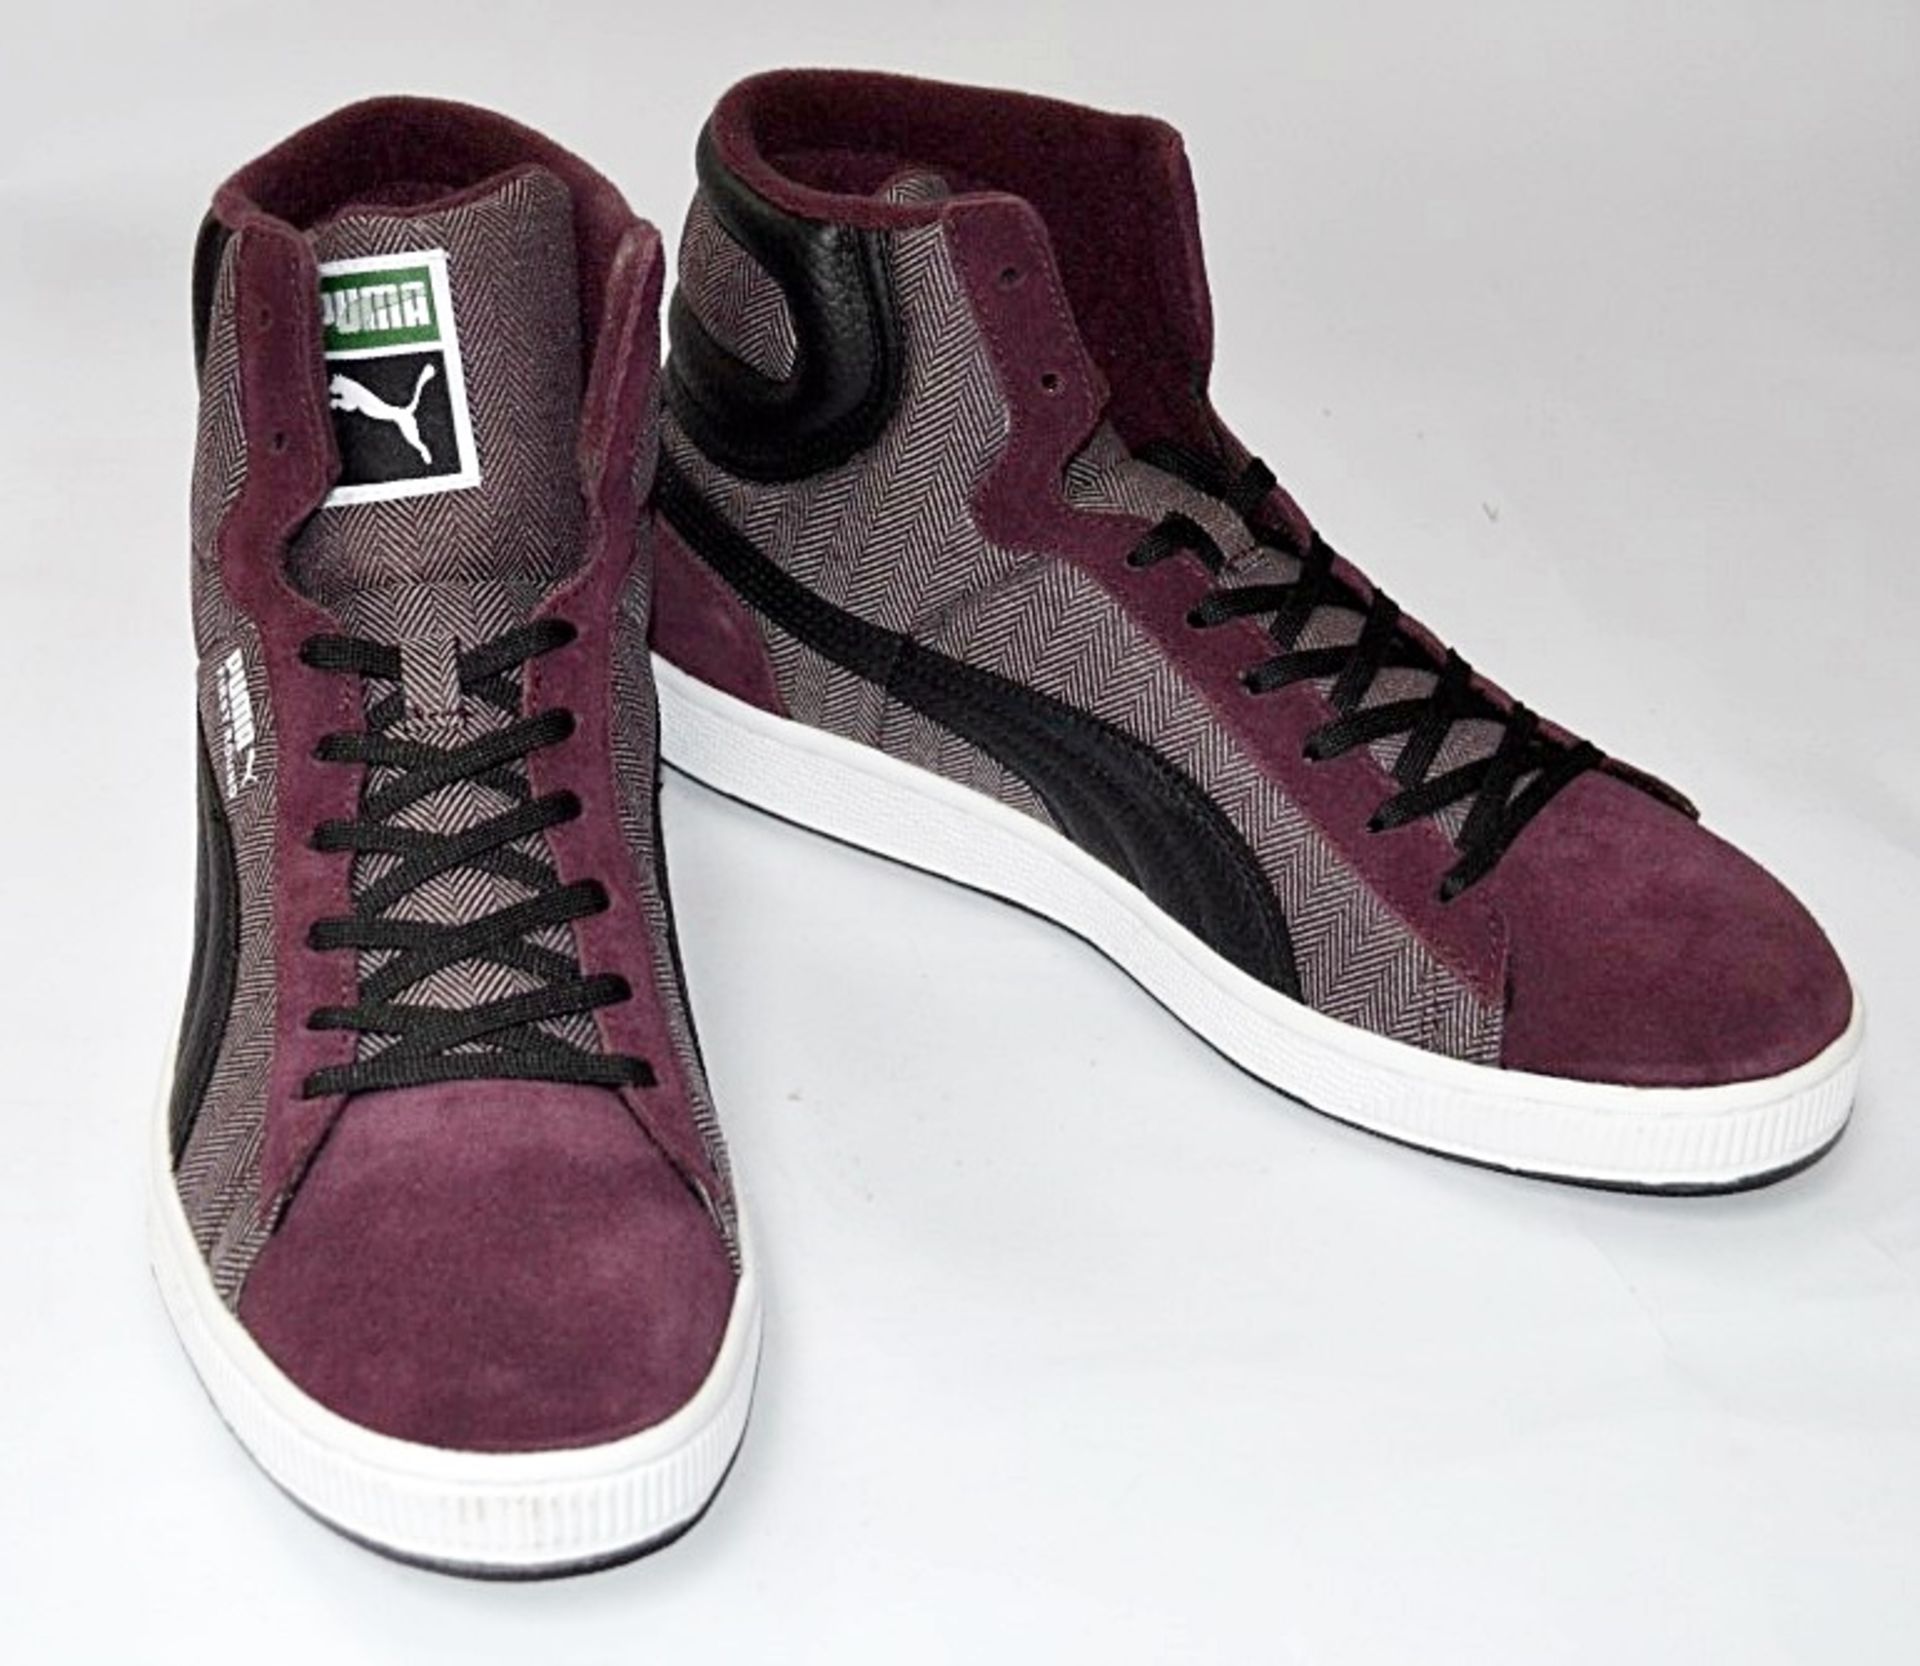 1 x Pair Of PUMA "First Round S Lodge" Mens Trainers - Adult Size: UK 9 - Colour: Wine / Black -